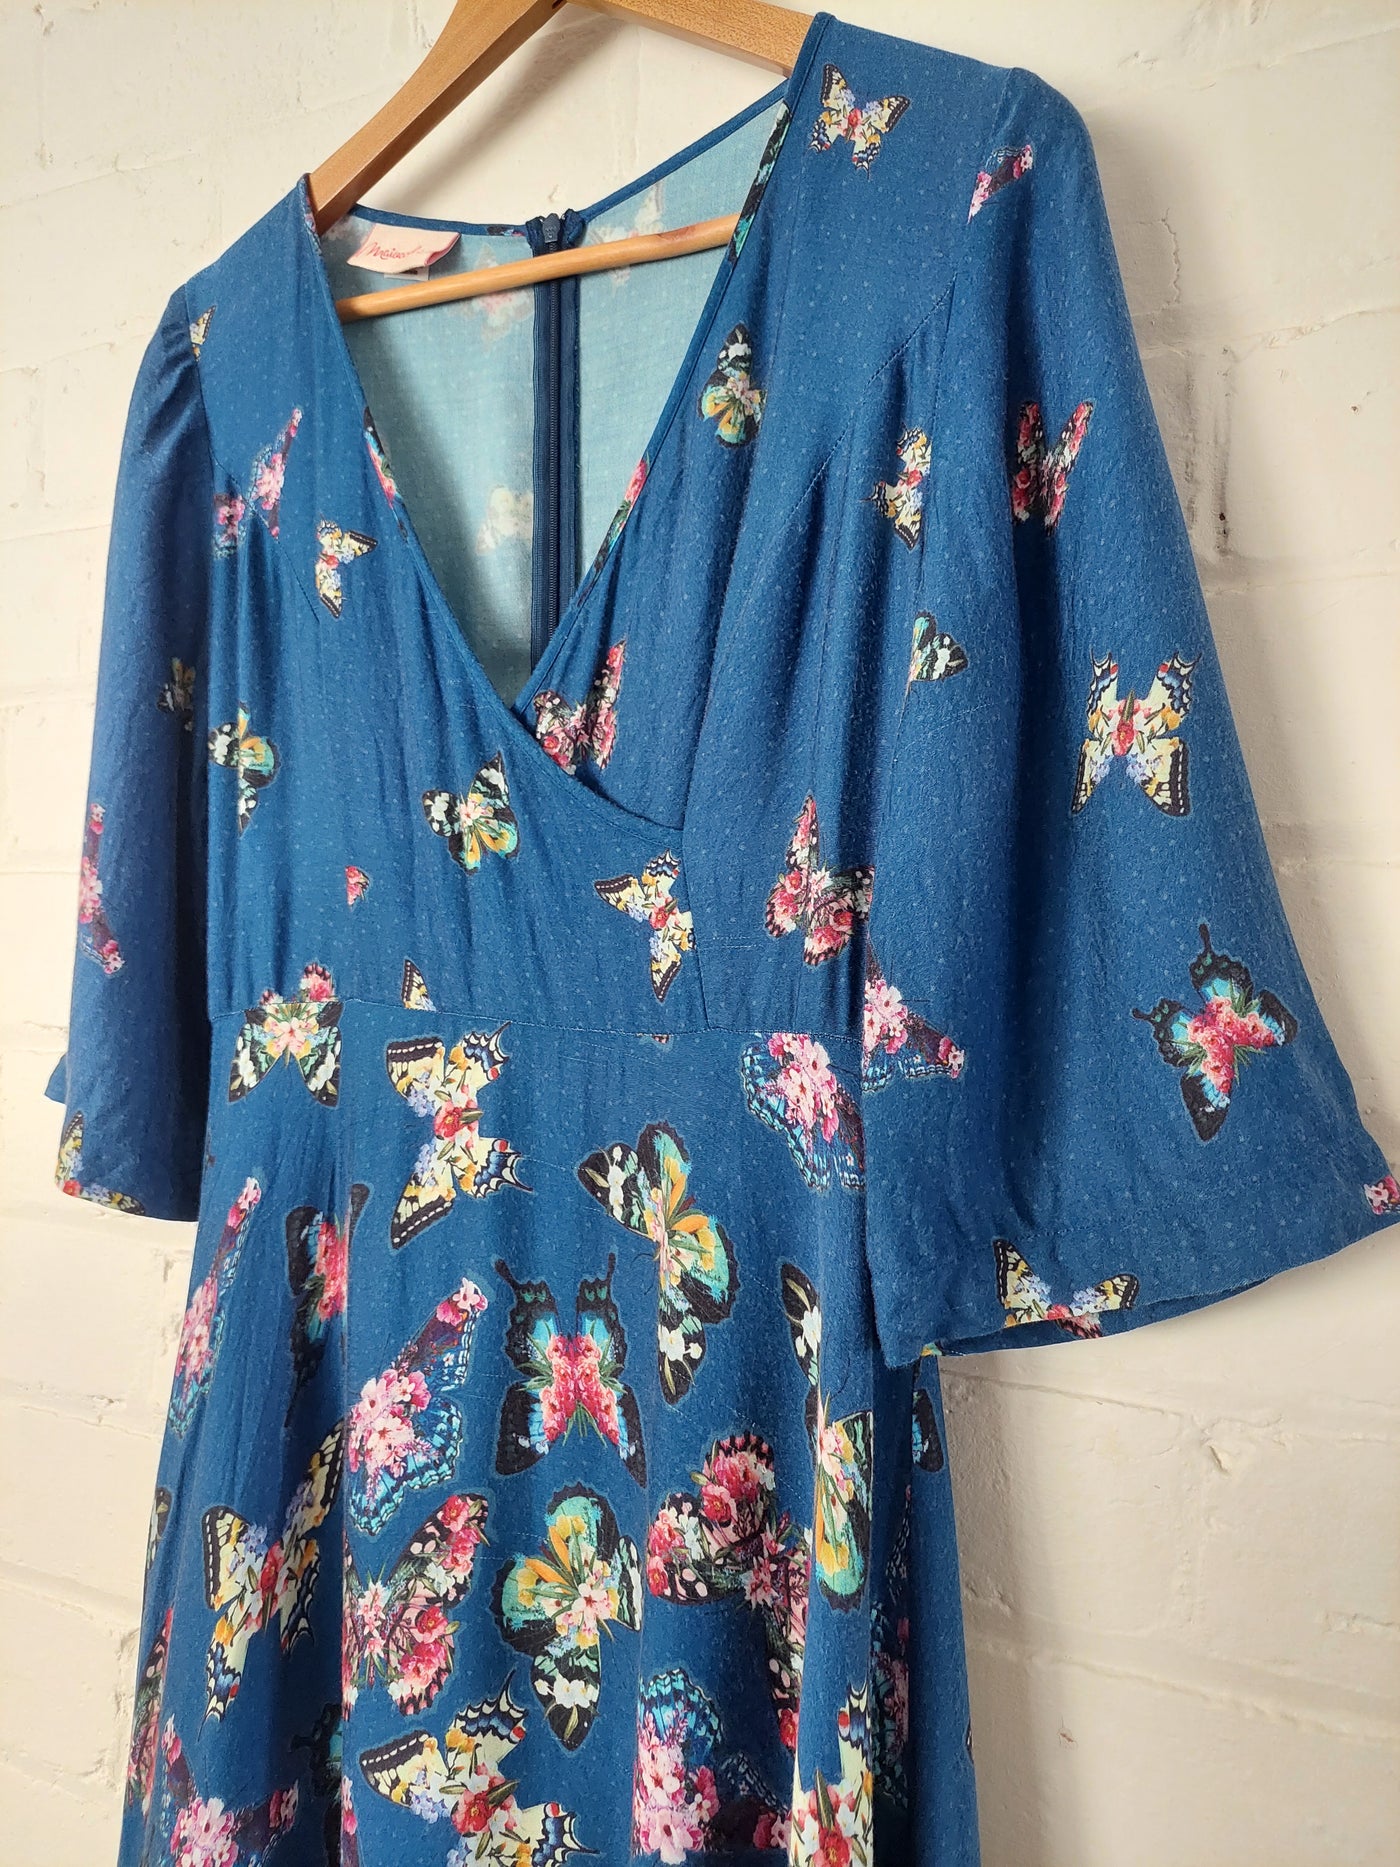 Maiocchi blue midi dress with floral butterfly print, Size 8